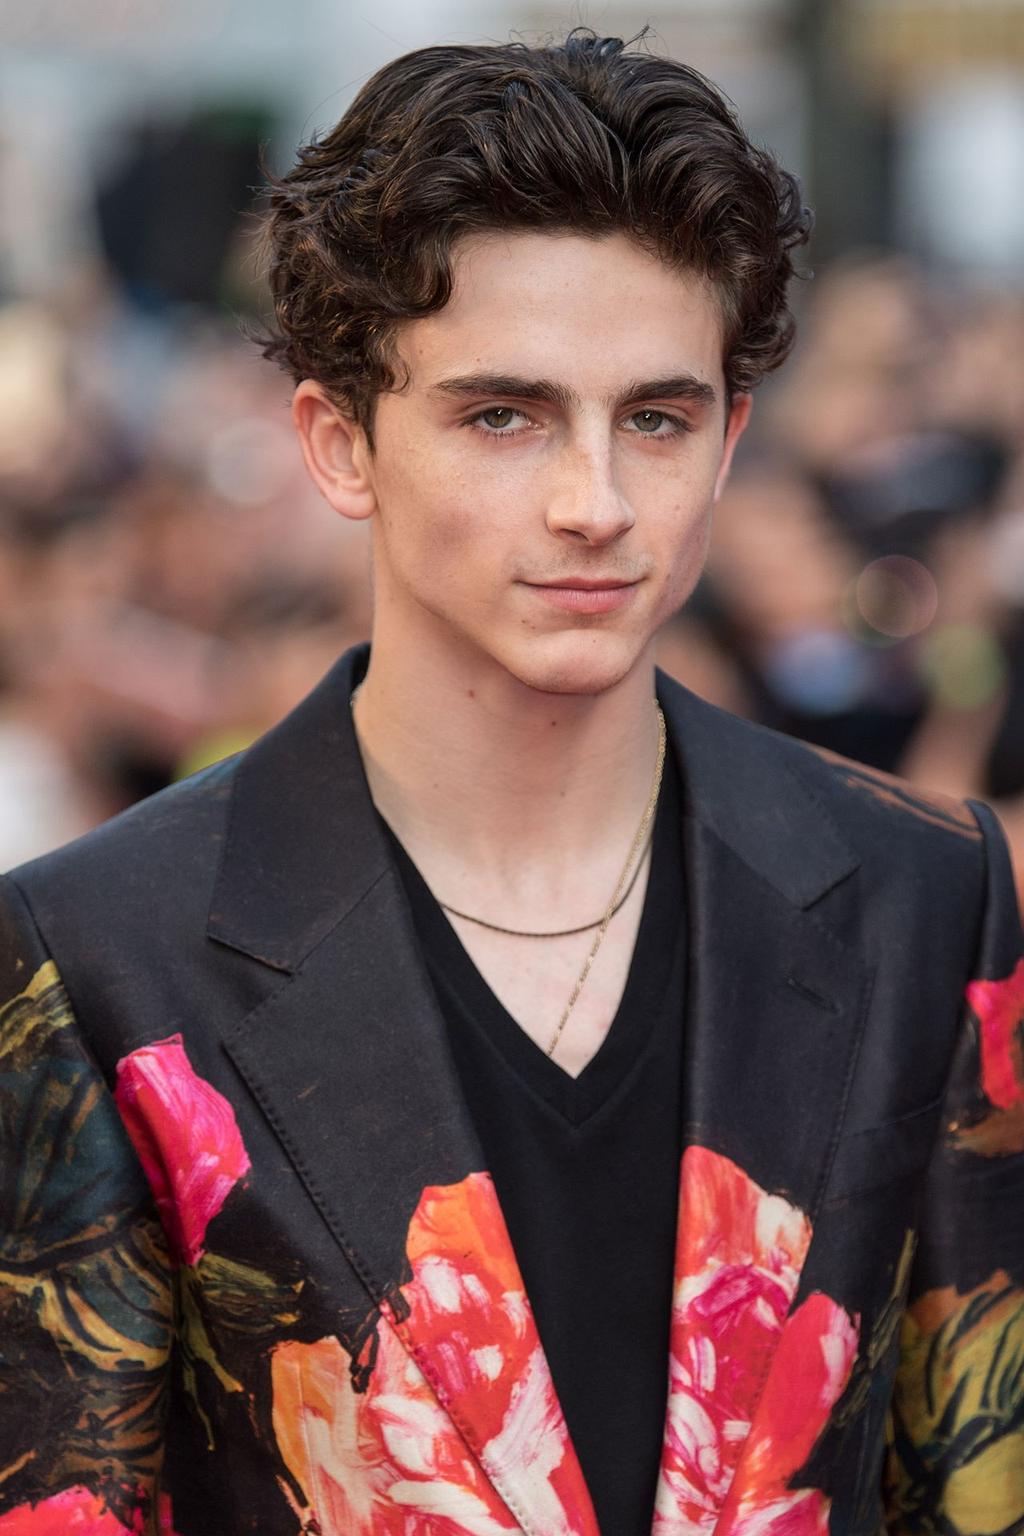 How Timothée Chalamet is ushering in a new era for masculinity